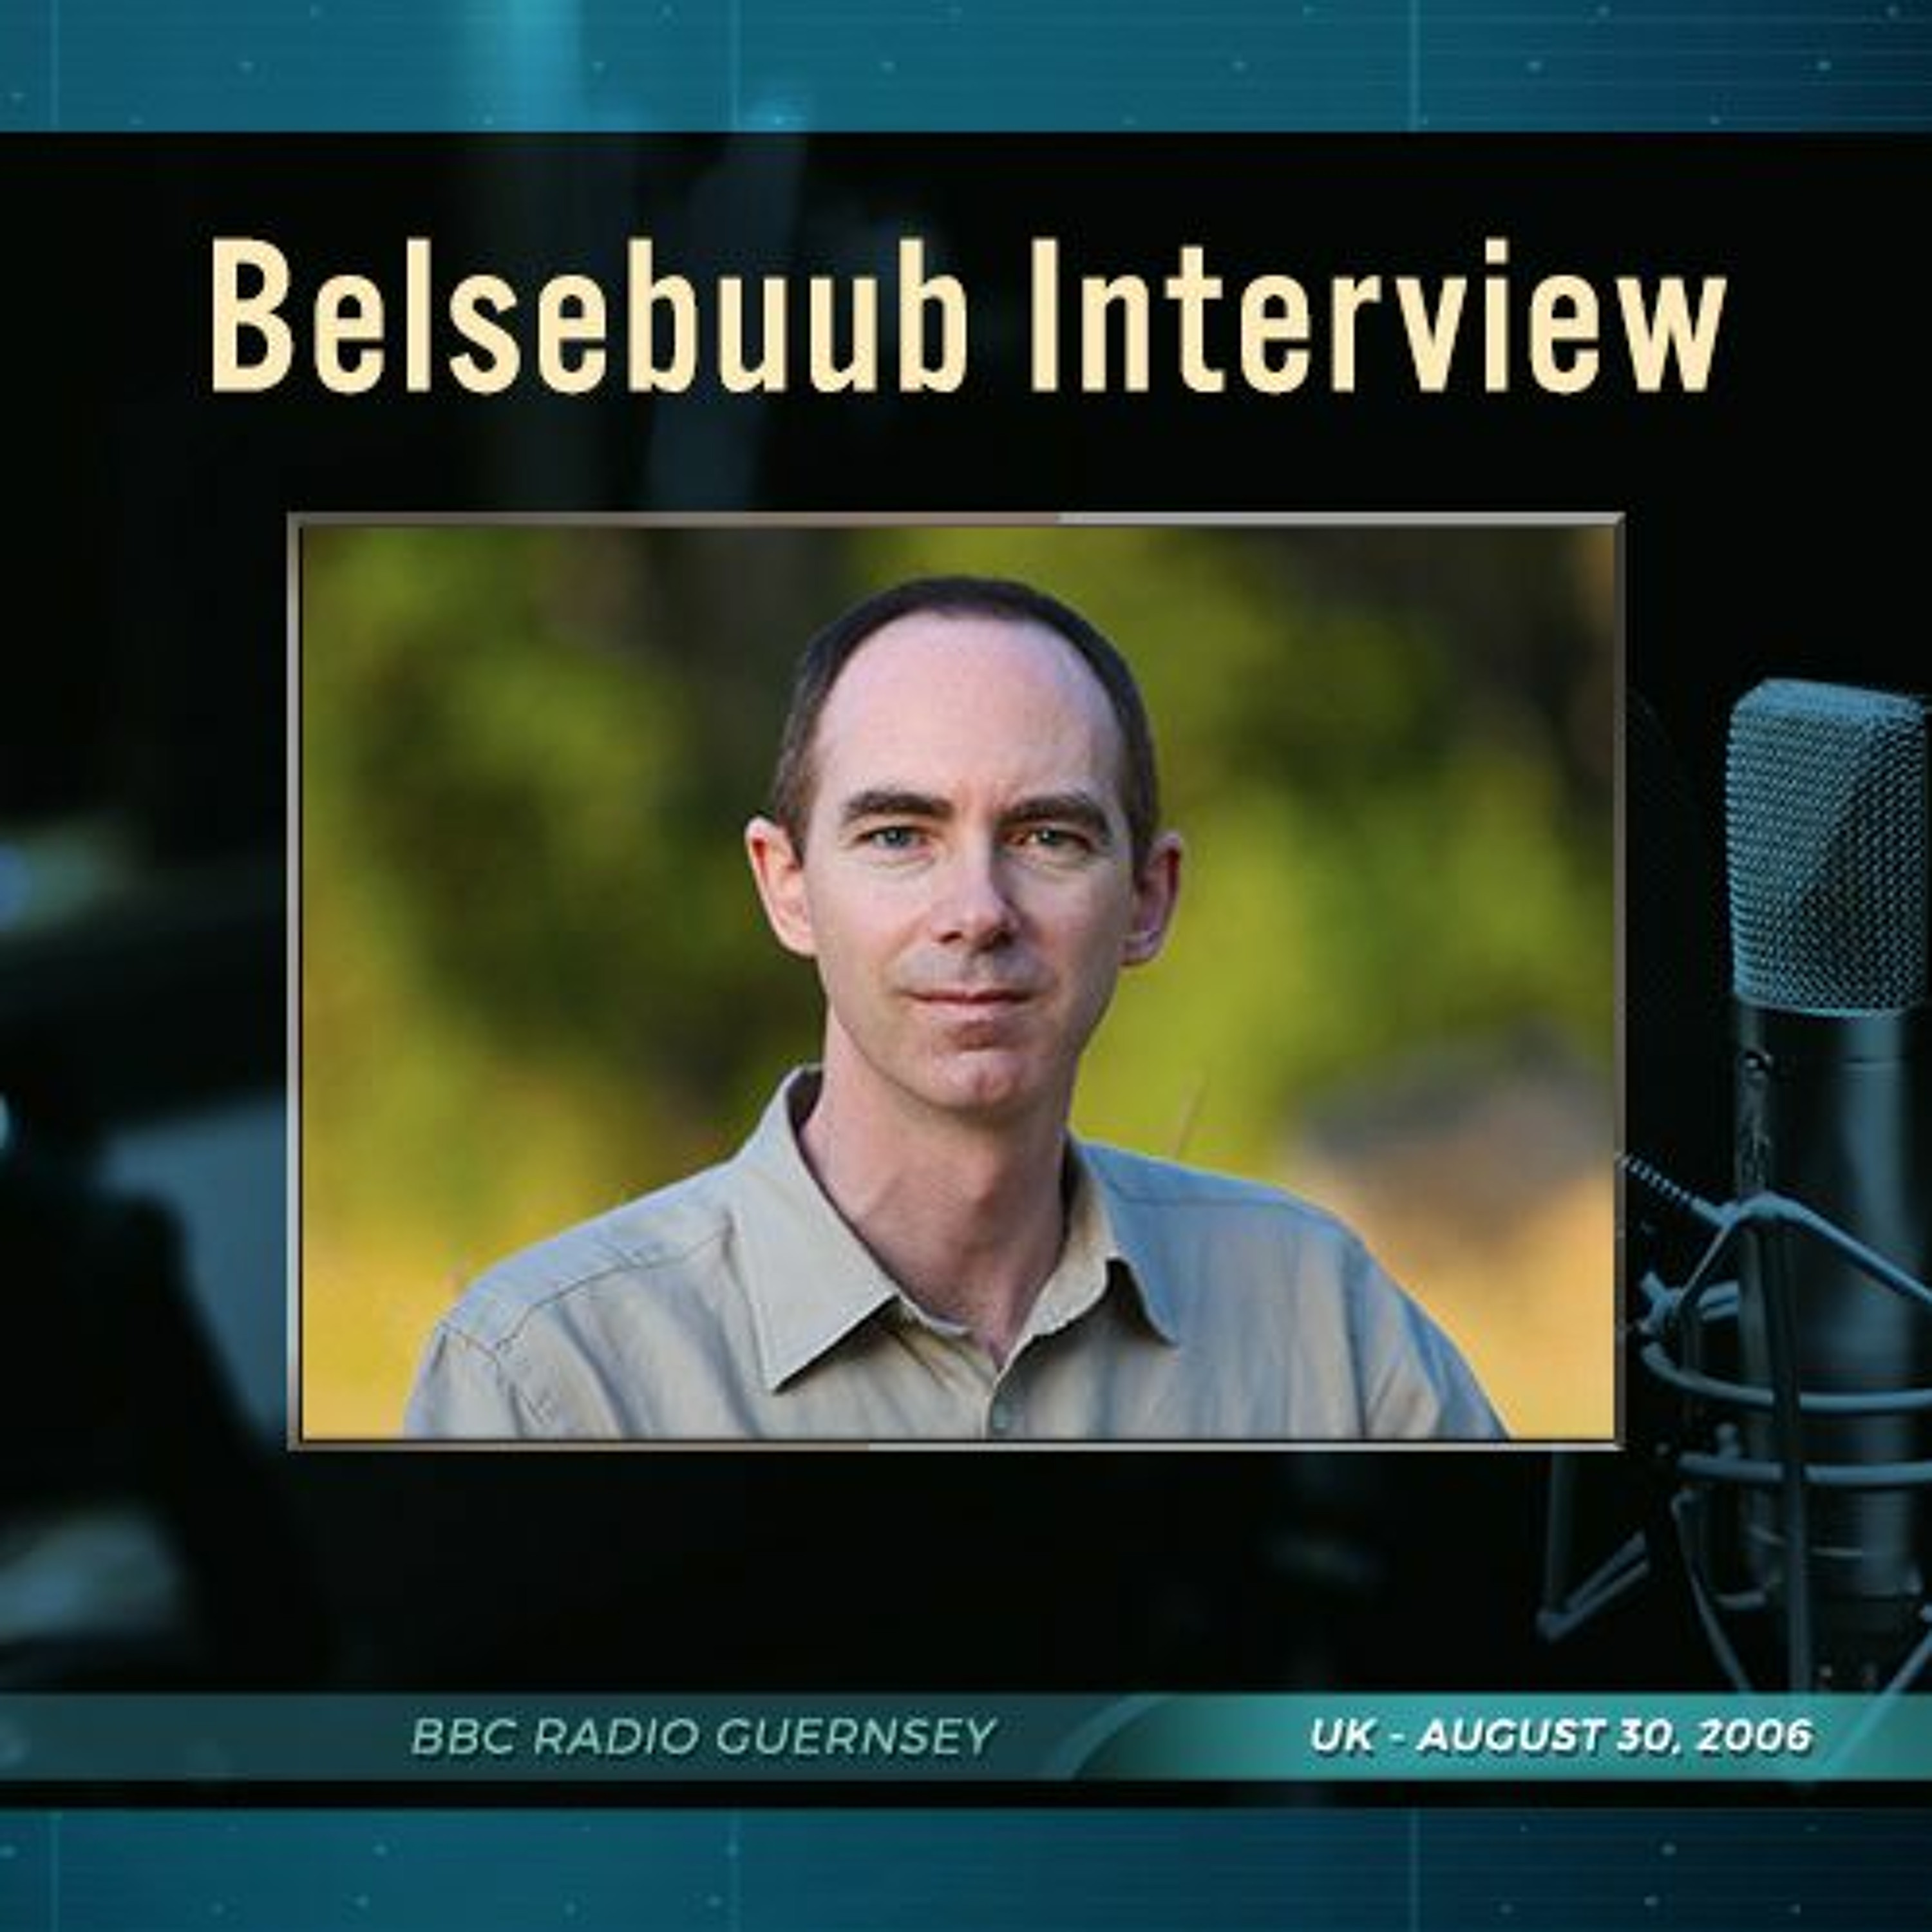 Belsebuub on BBC Radio Guernsey: NDEs and the Light at the End of the Tunnel